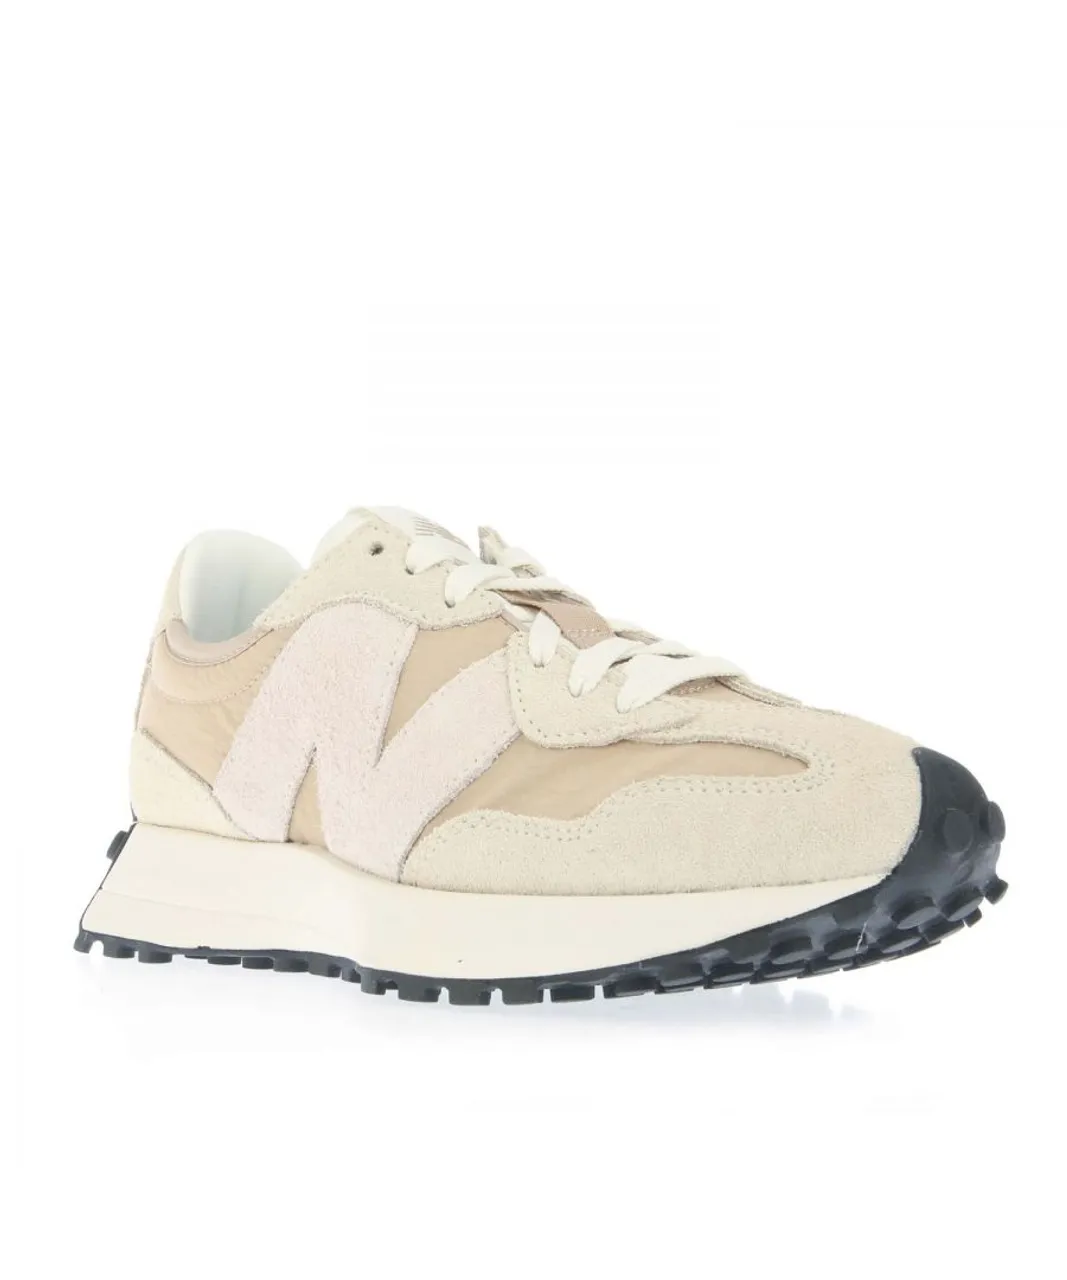 New Balance Womenss 327 Trainers in Beige